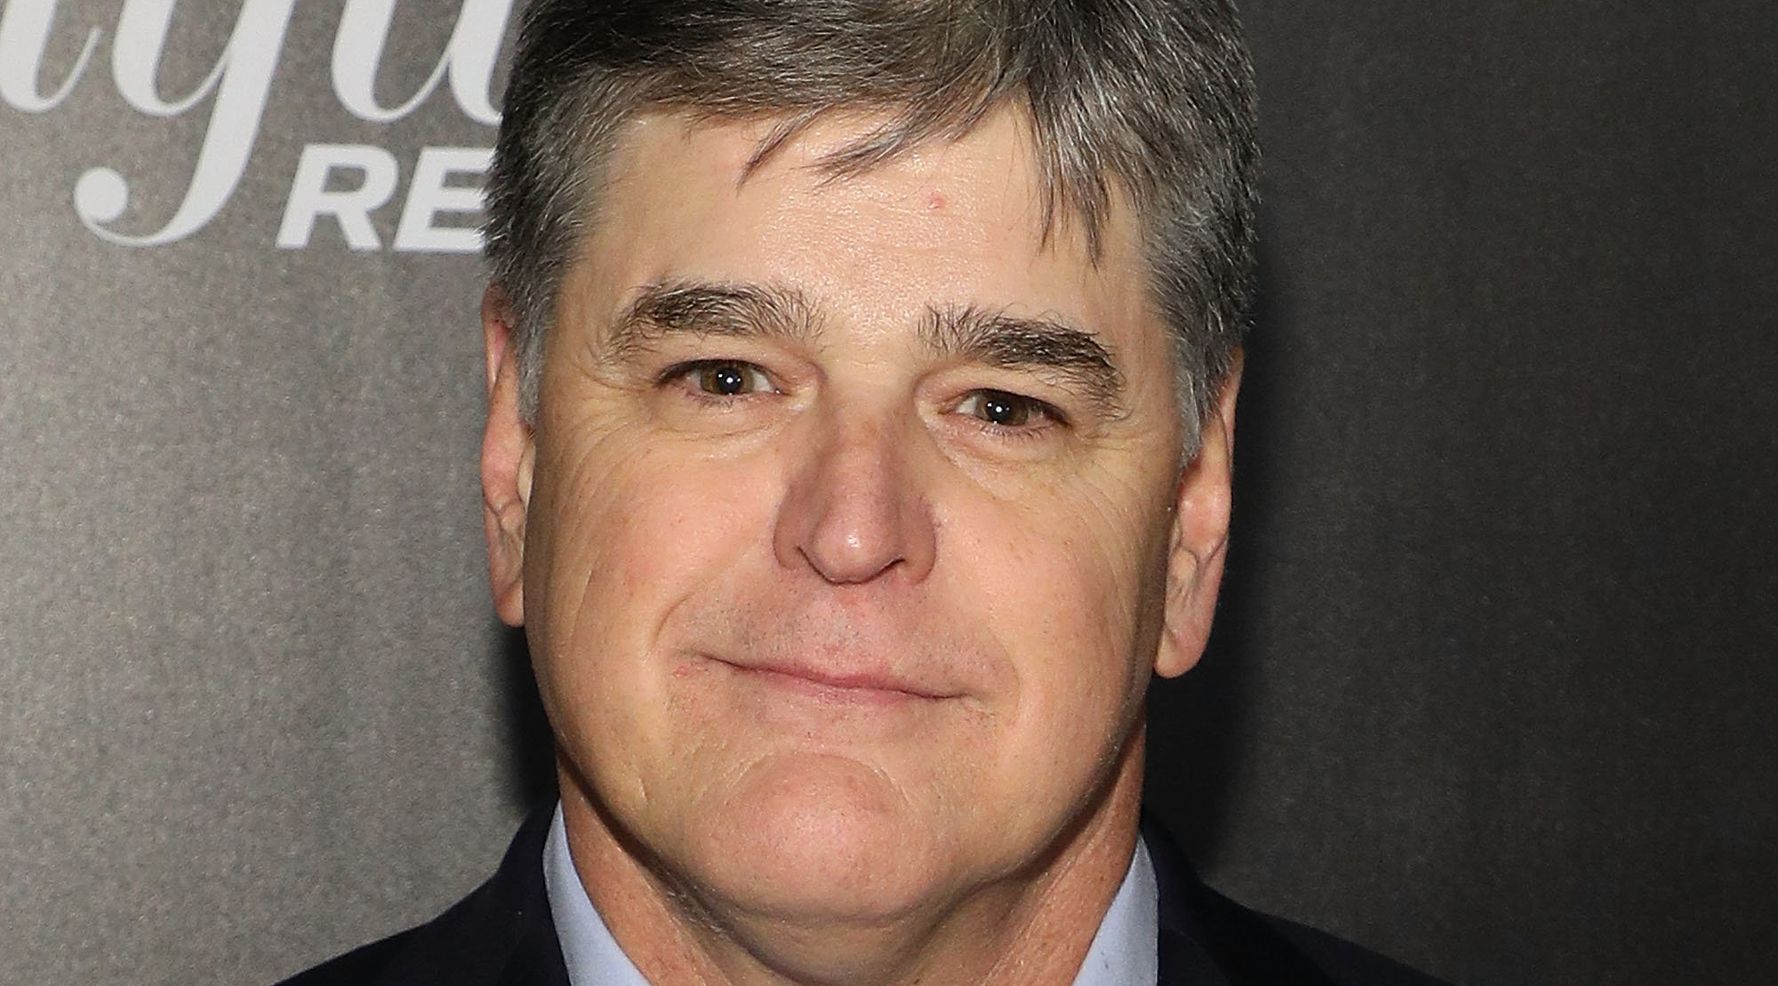 Sean Hannity And Jill Rhodes Divorce After 26 Years Of Marriage - HuffPost